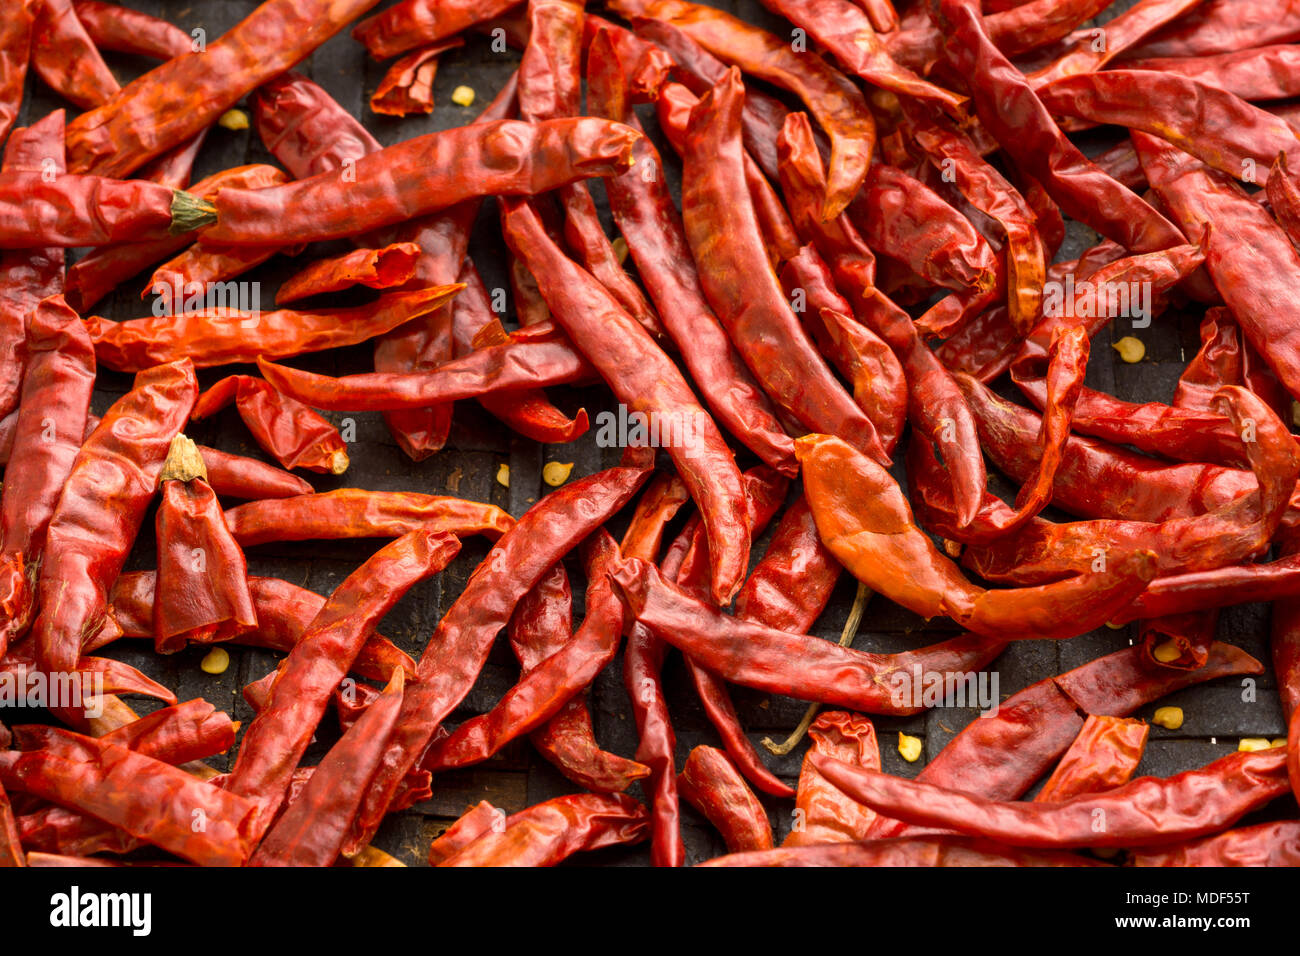 Sun-dried chilli peppers in threshing basket. Stock Photo